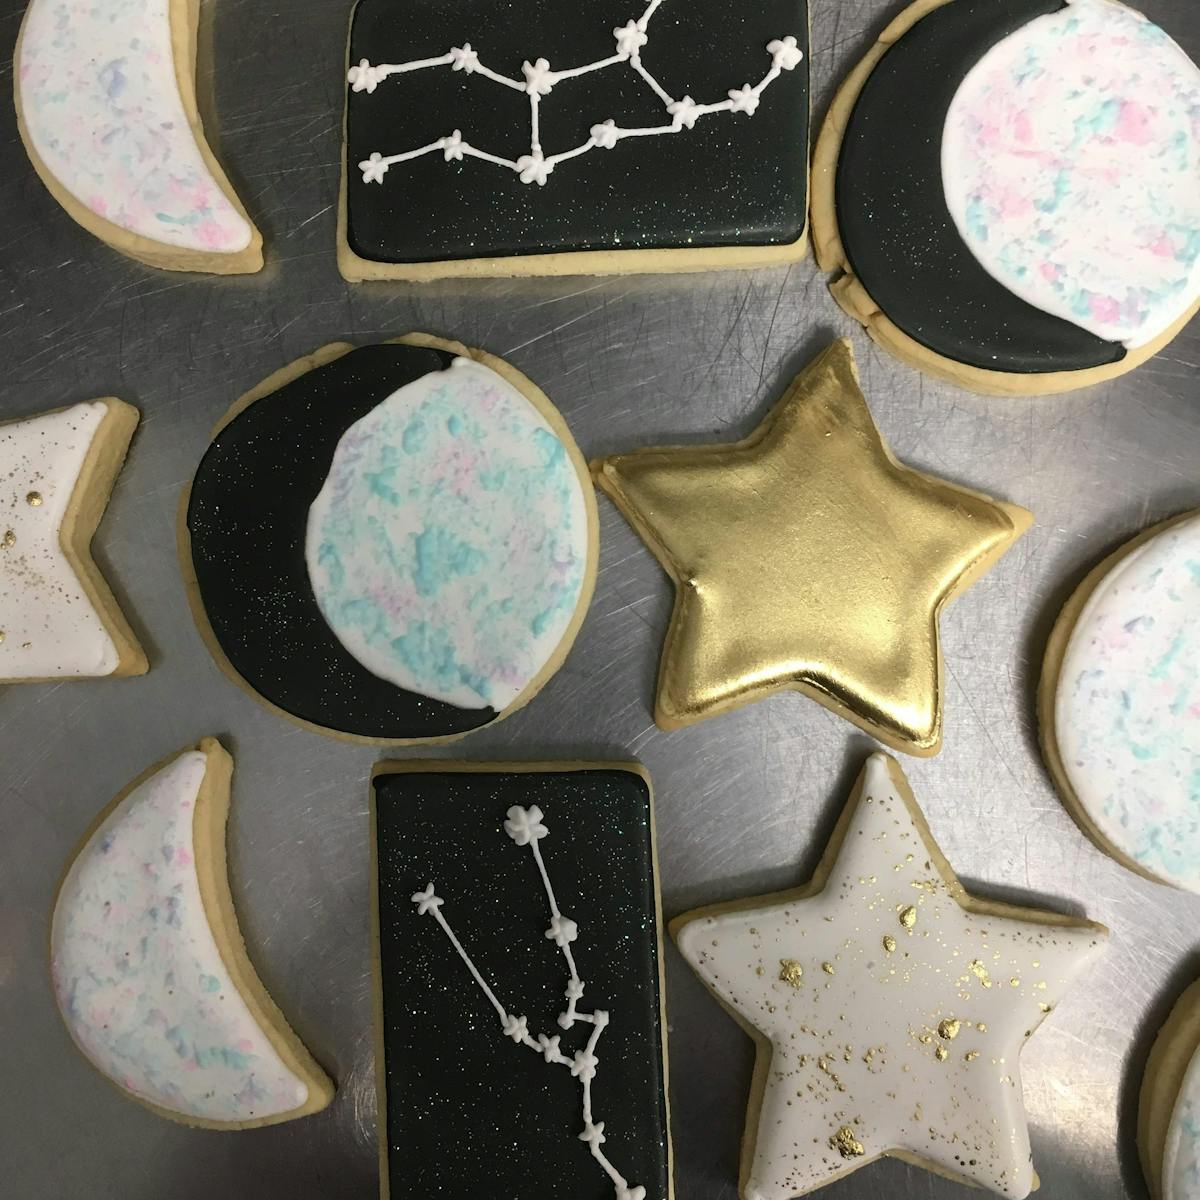 astrology shaped cookies